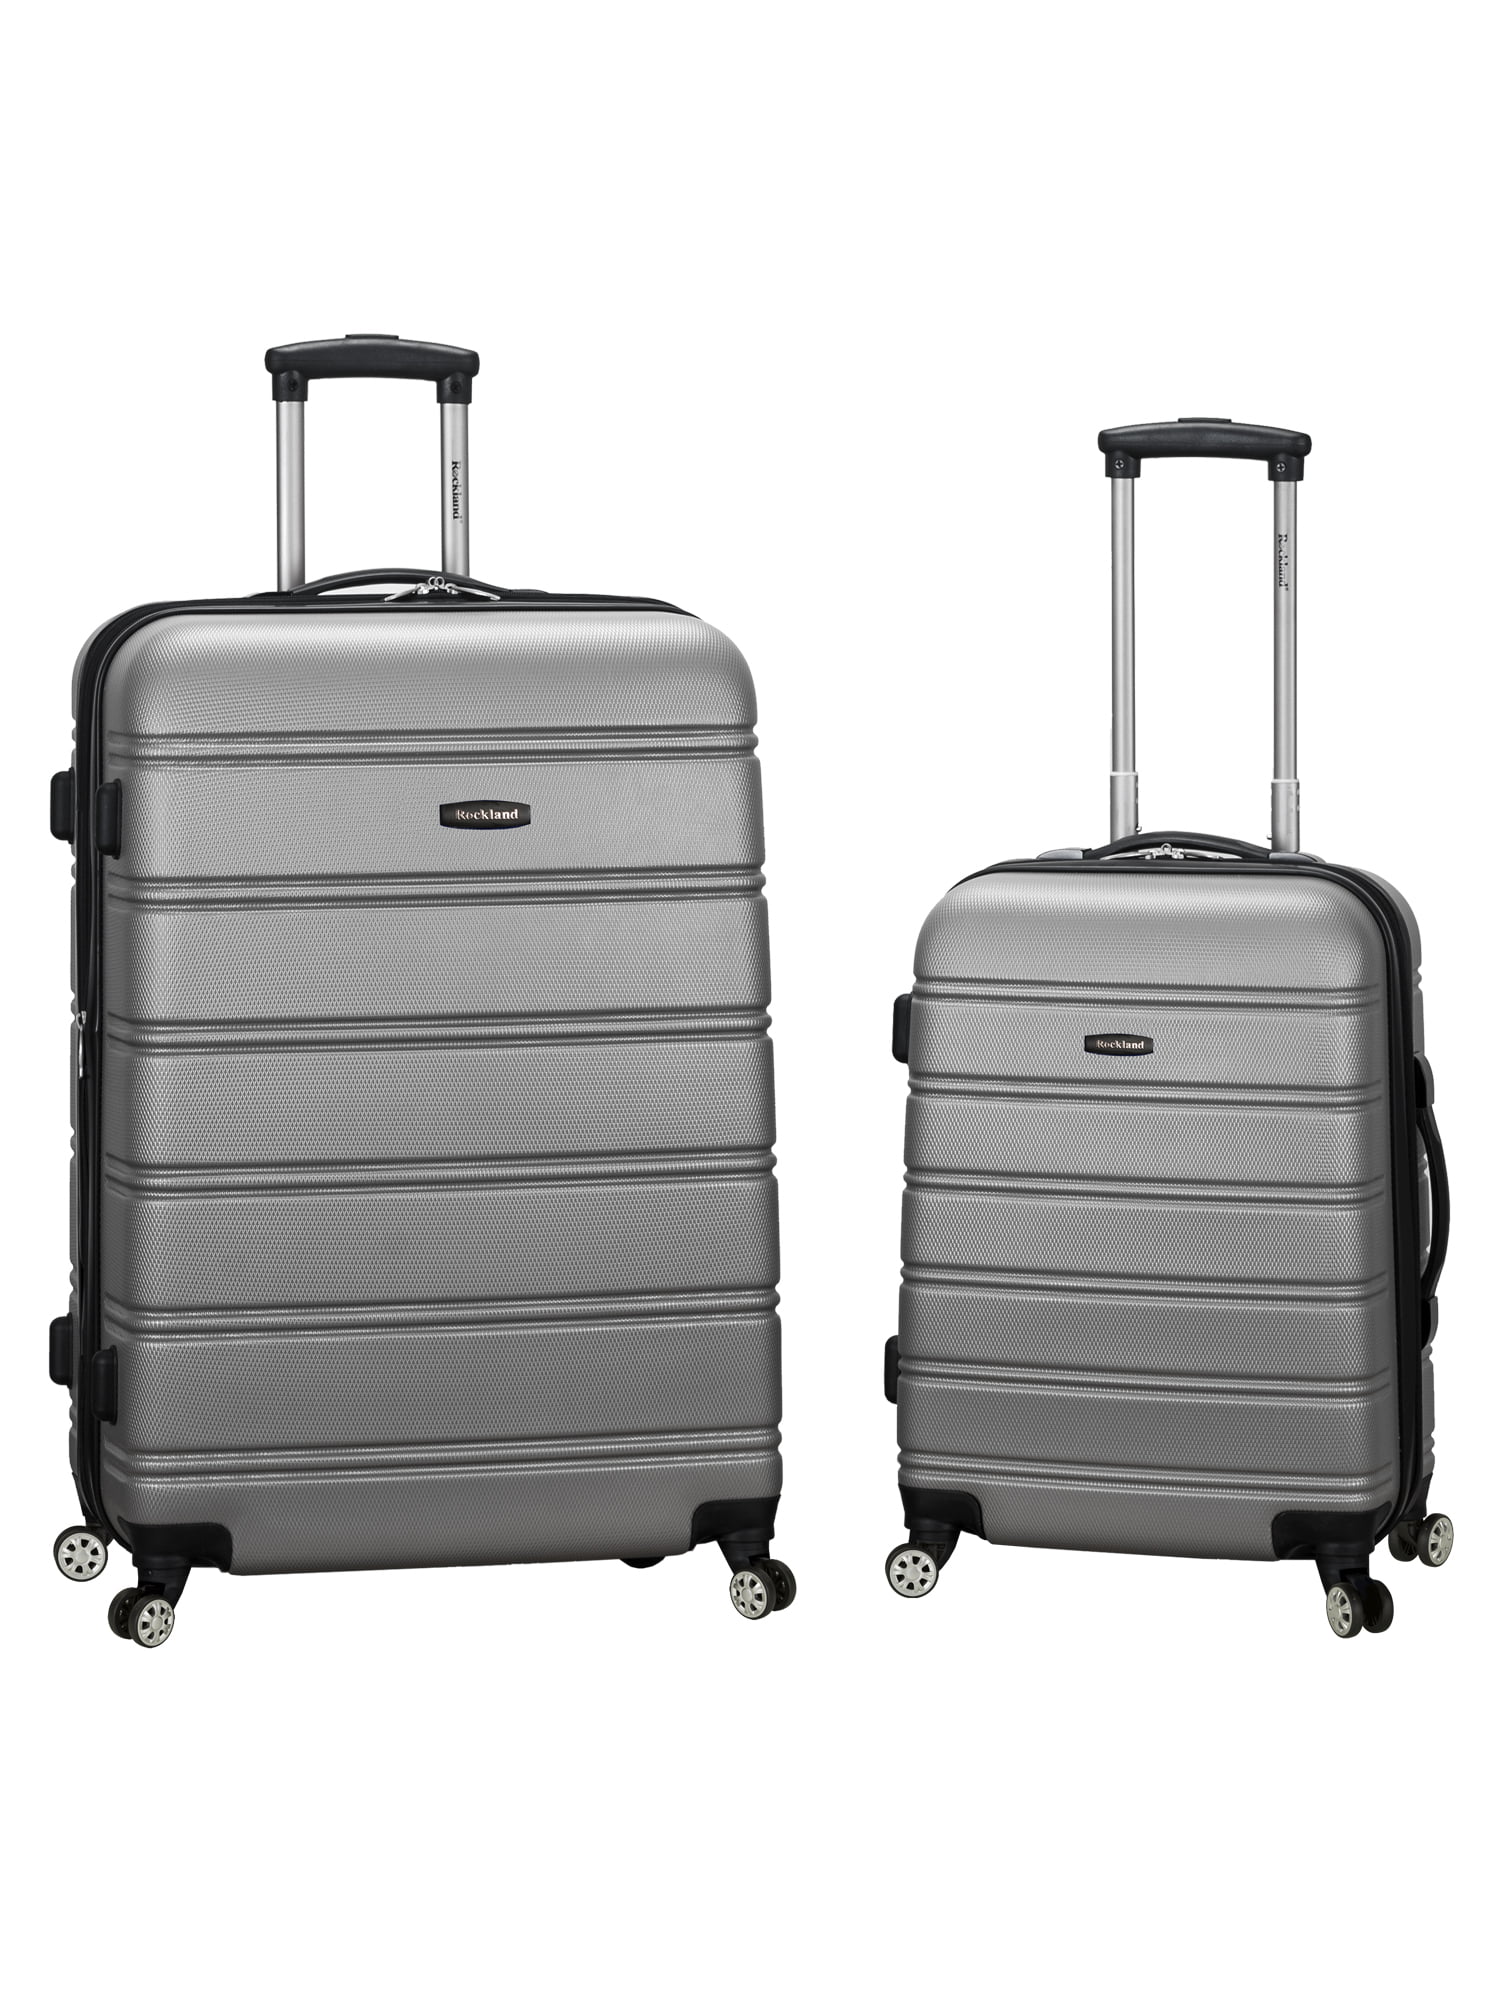 White ROCKLAND 20 Inch 28 Inch 2PC Expandable ABS Spinner Set One Size